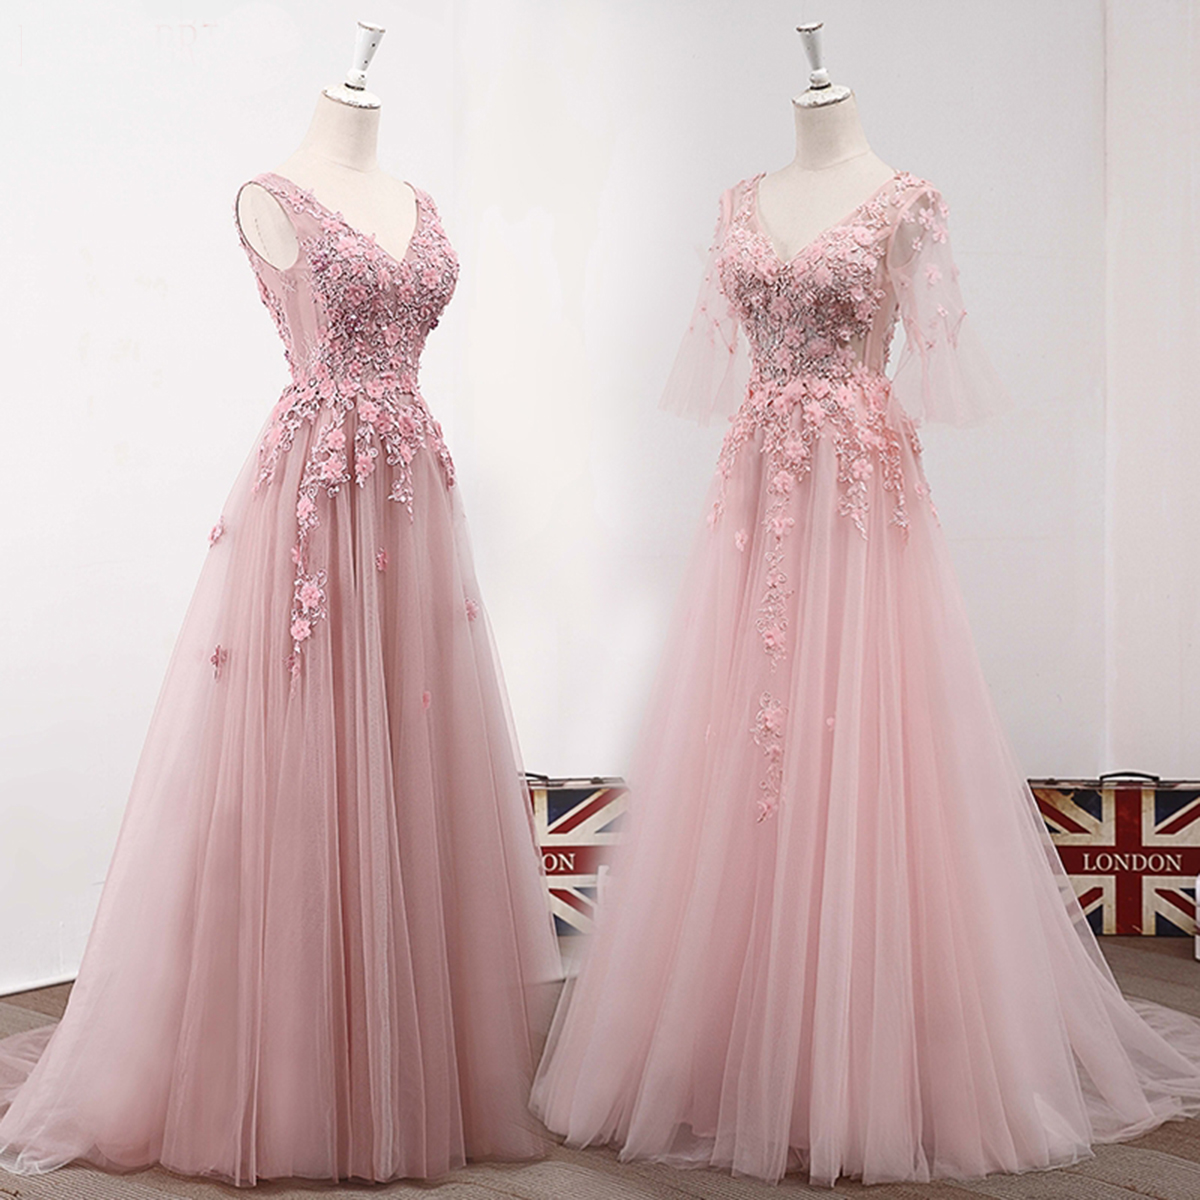 Prom Dresses, Fashion Prom Dresses,pink Tulle V Neck Long Lace Appliques A-line Prom Dress,pd14166